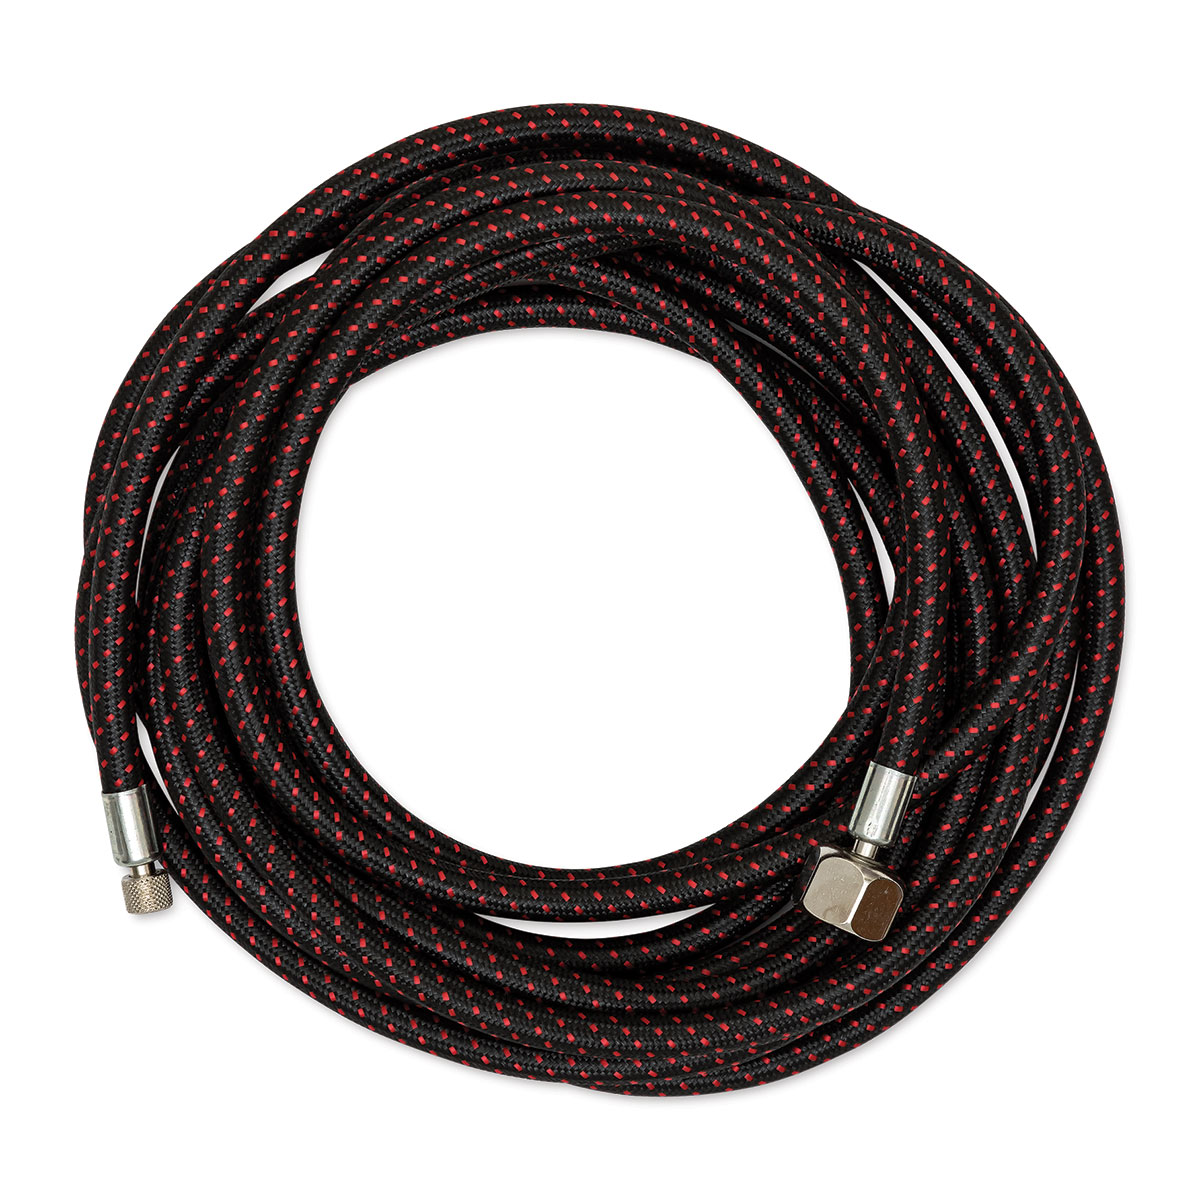 Iwata Airbrush Accessory - 10 ft, Braided Air Hose, with 1/4'' fittings on  both ends